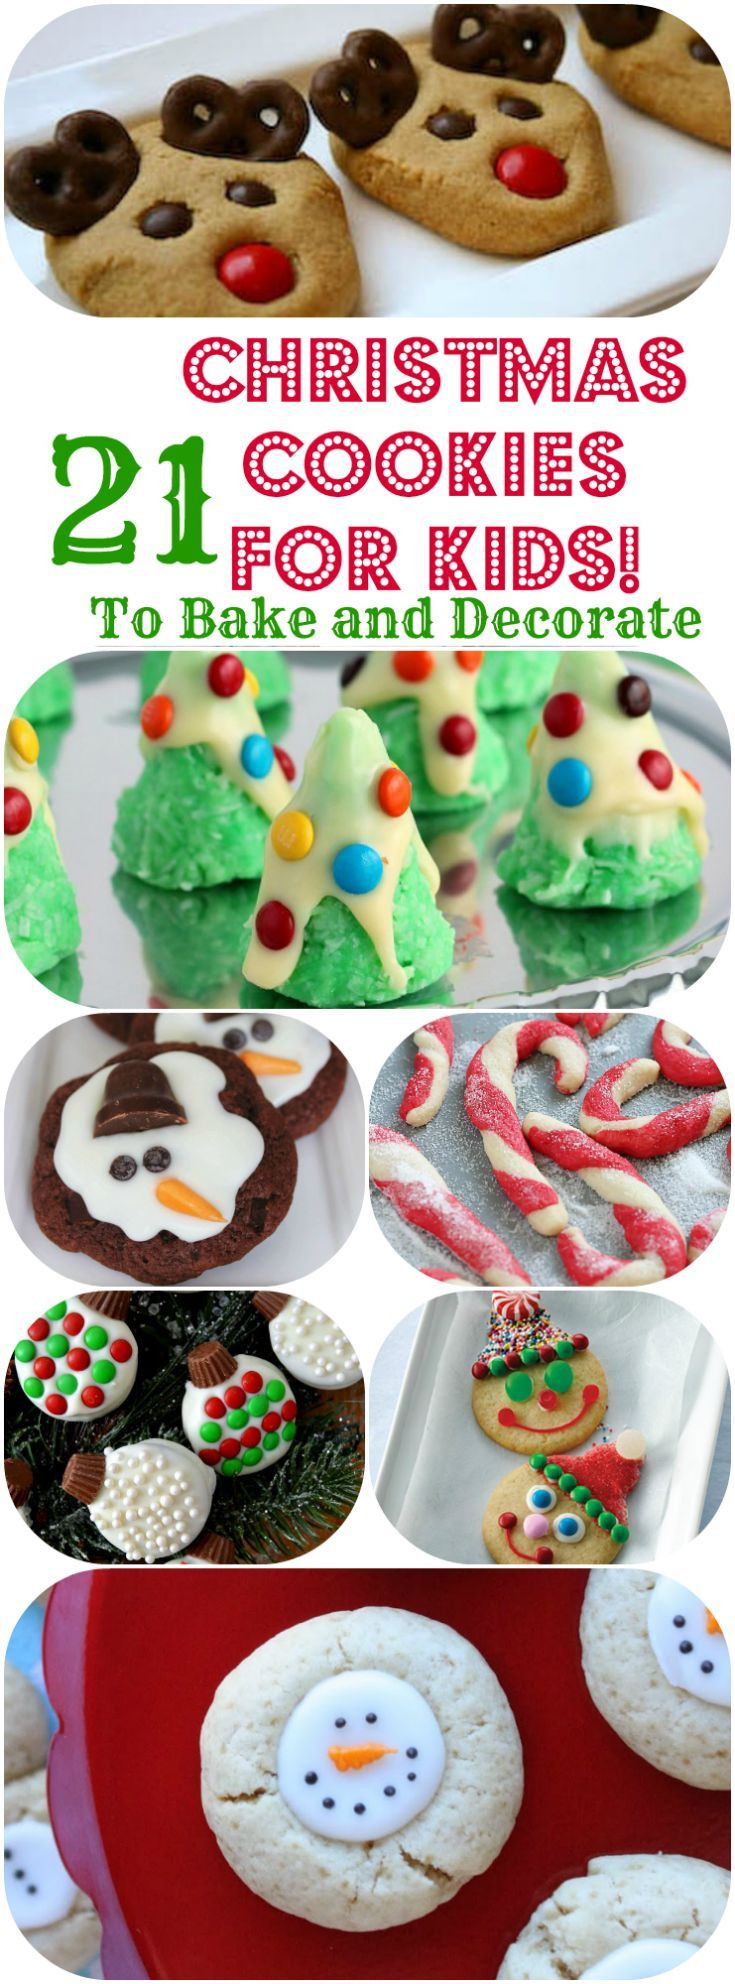 Christmas Baking Ideas For Kids
 1000 ideas about Kid Desserts on Pinterest